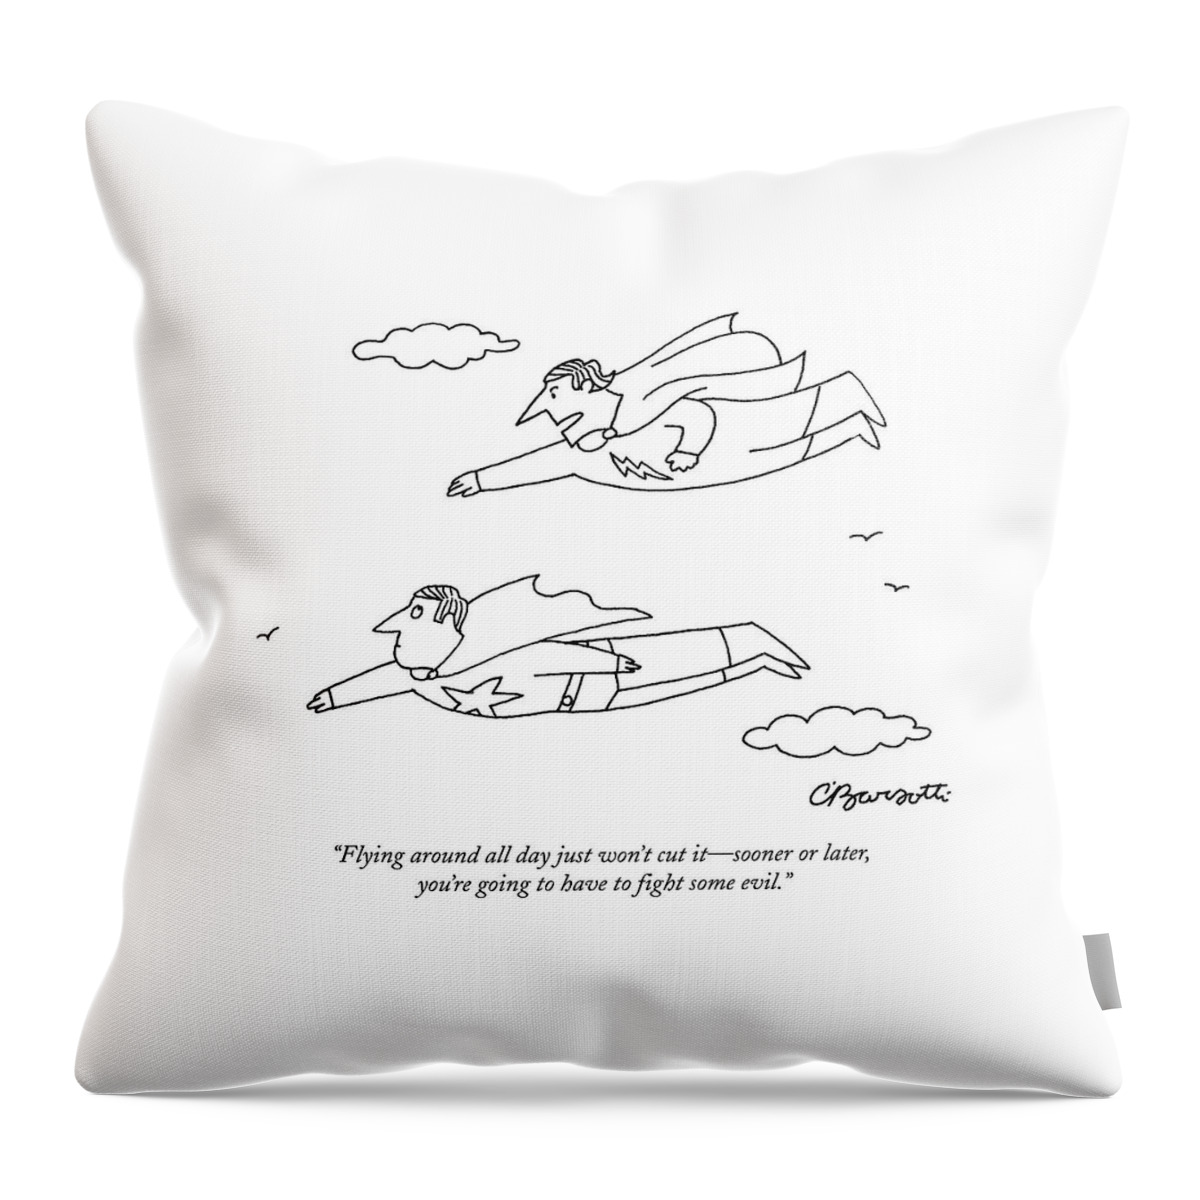 Flying Around All Day Just Won't Cut It - Sooner Throw Pillow